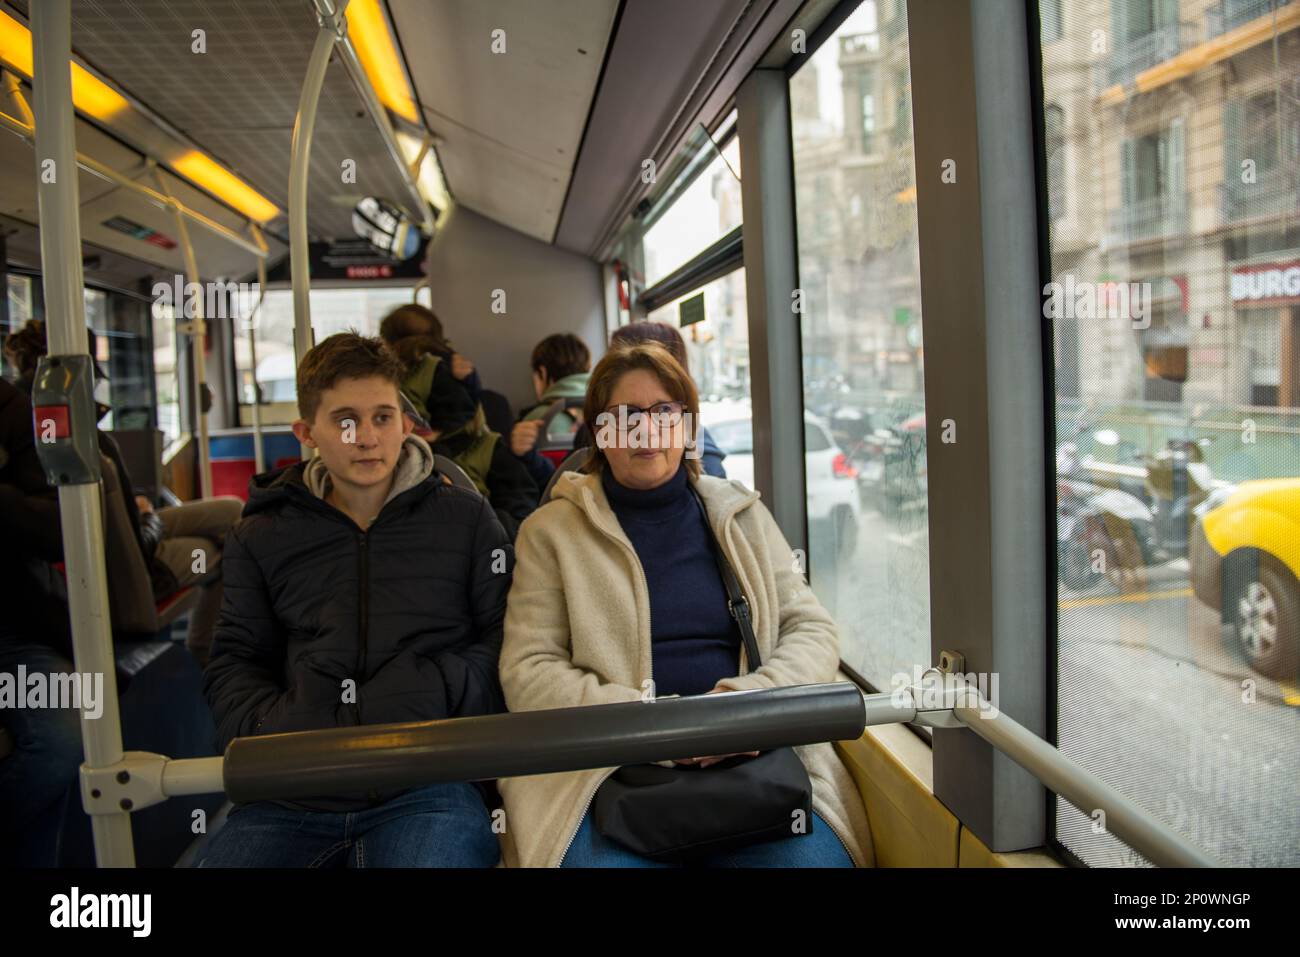 Mother and son traveling in a bus, Two people  using public transportation Stock Photo